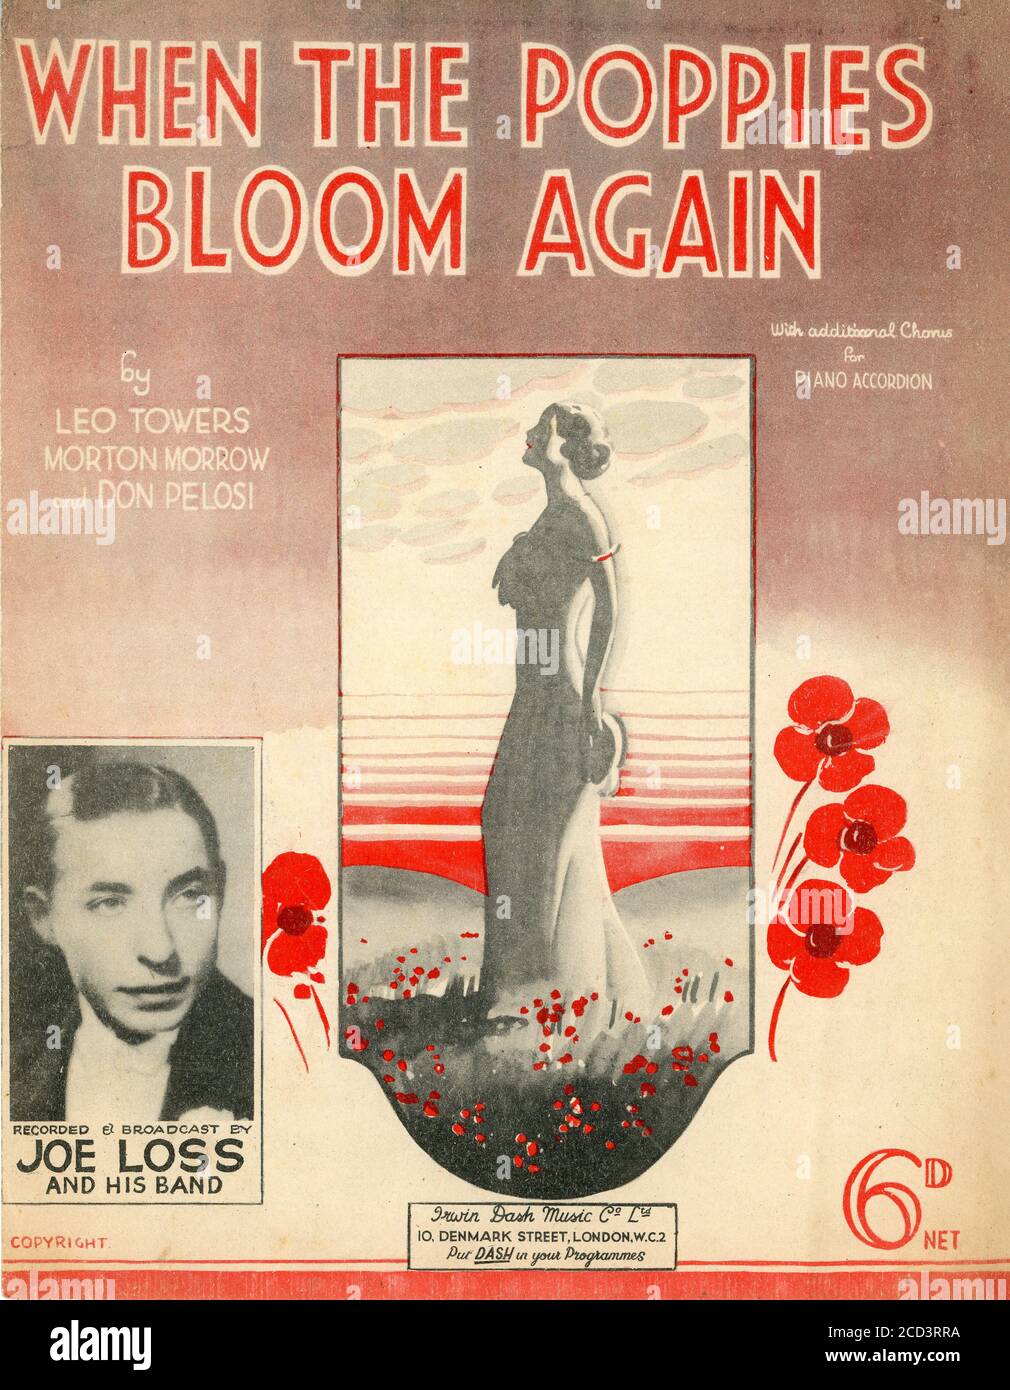 Sheet Music - When the Poppies Bloom Again - Joe Loss and his band - 1936 Stock Photo